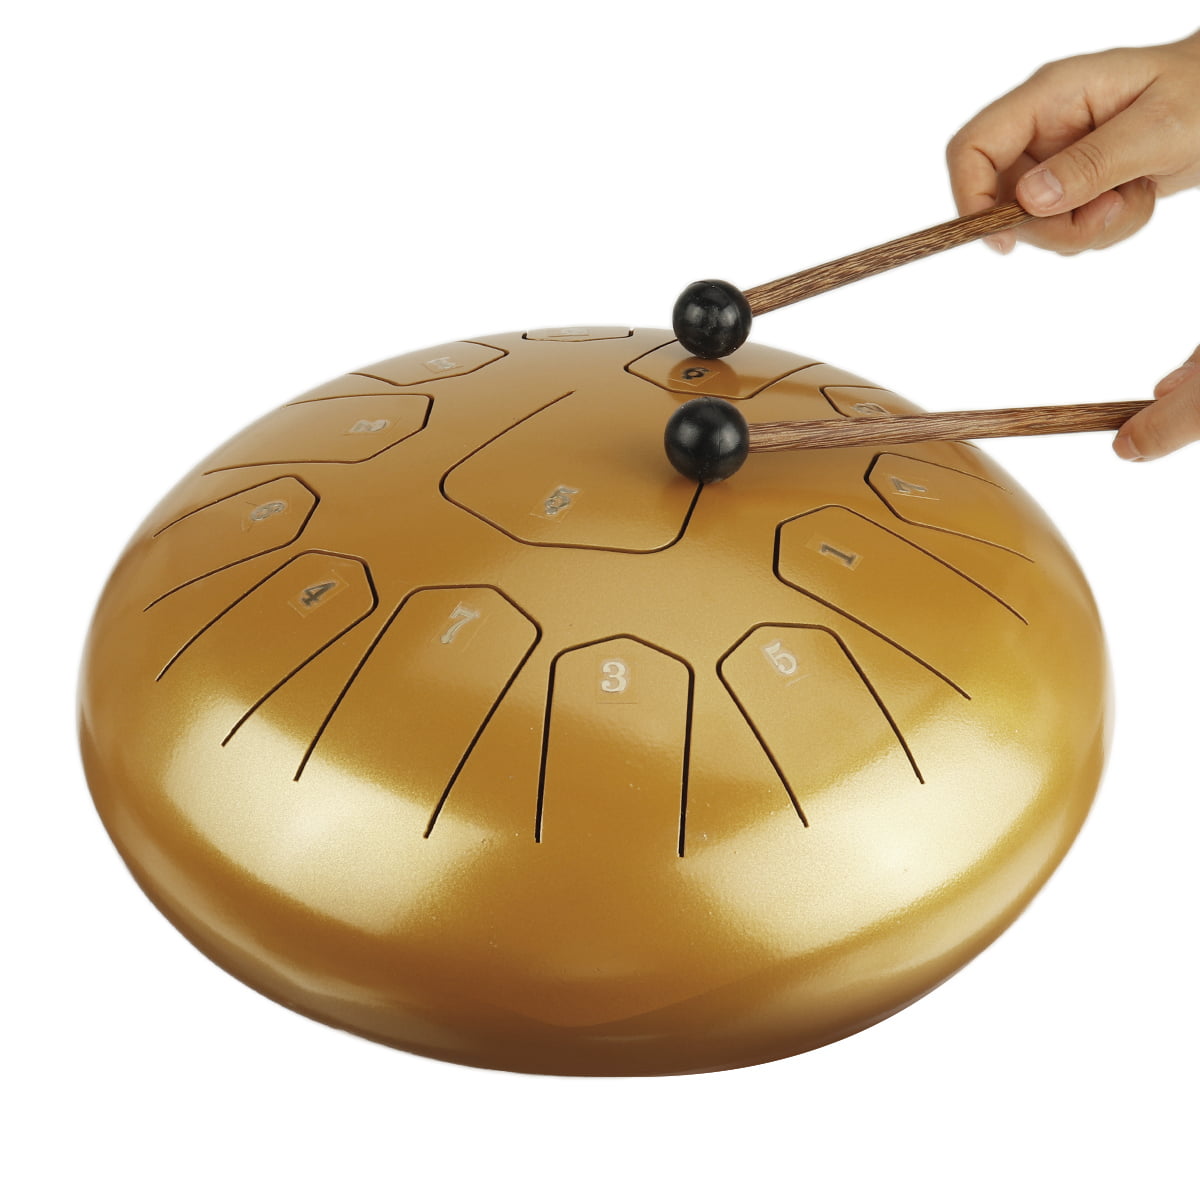 11 Notes Steel Tongue Drum Tank Chakra Drum with Padded Travel Bag Portable Handpan Drum 10, Black Finger Picks Percussion Instrument Mallets Music Book Sticker Drumsticks Bracket